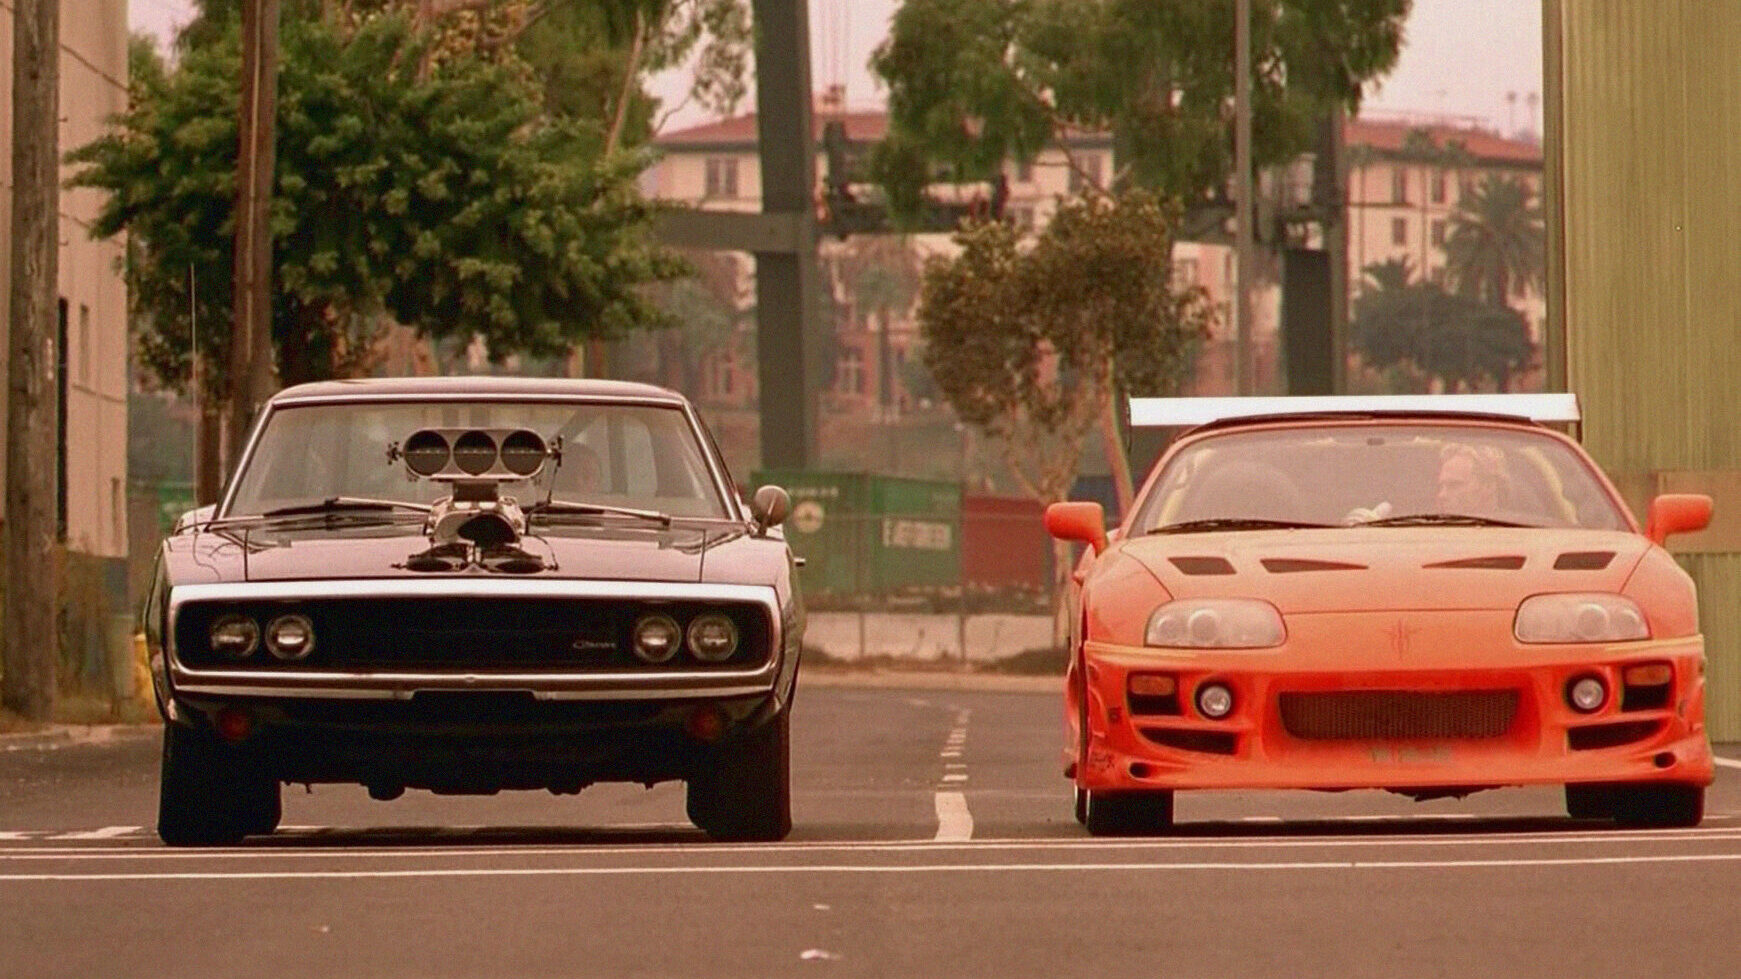 The Fast and the Furious films